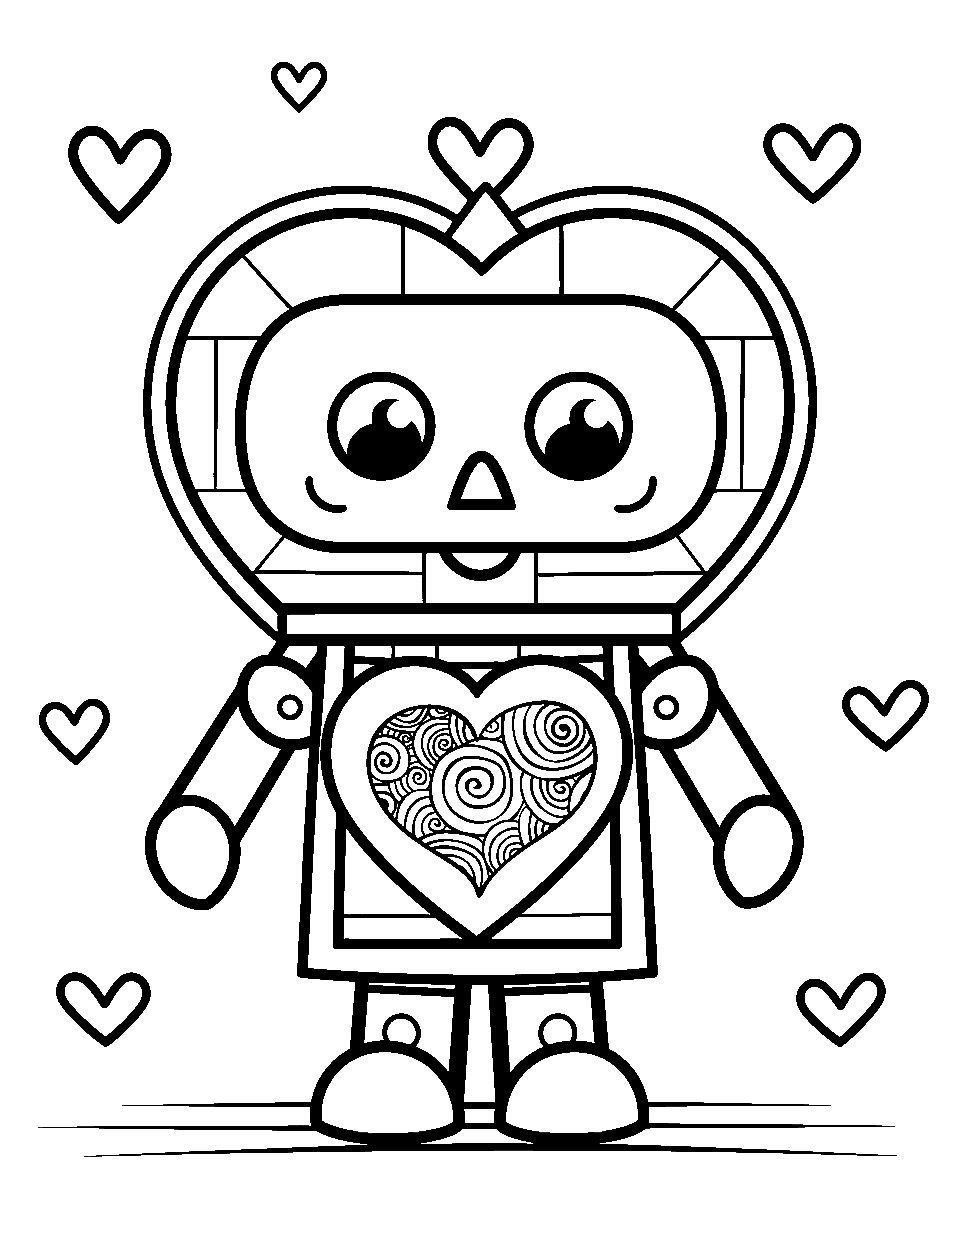 Loving Robot with a Heart Screen Coloring Page - A robot displaying a heart on its chest screen.